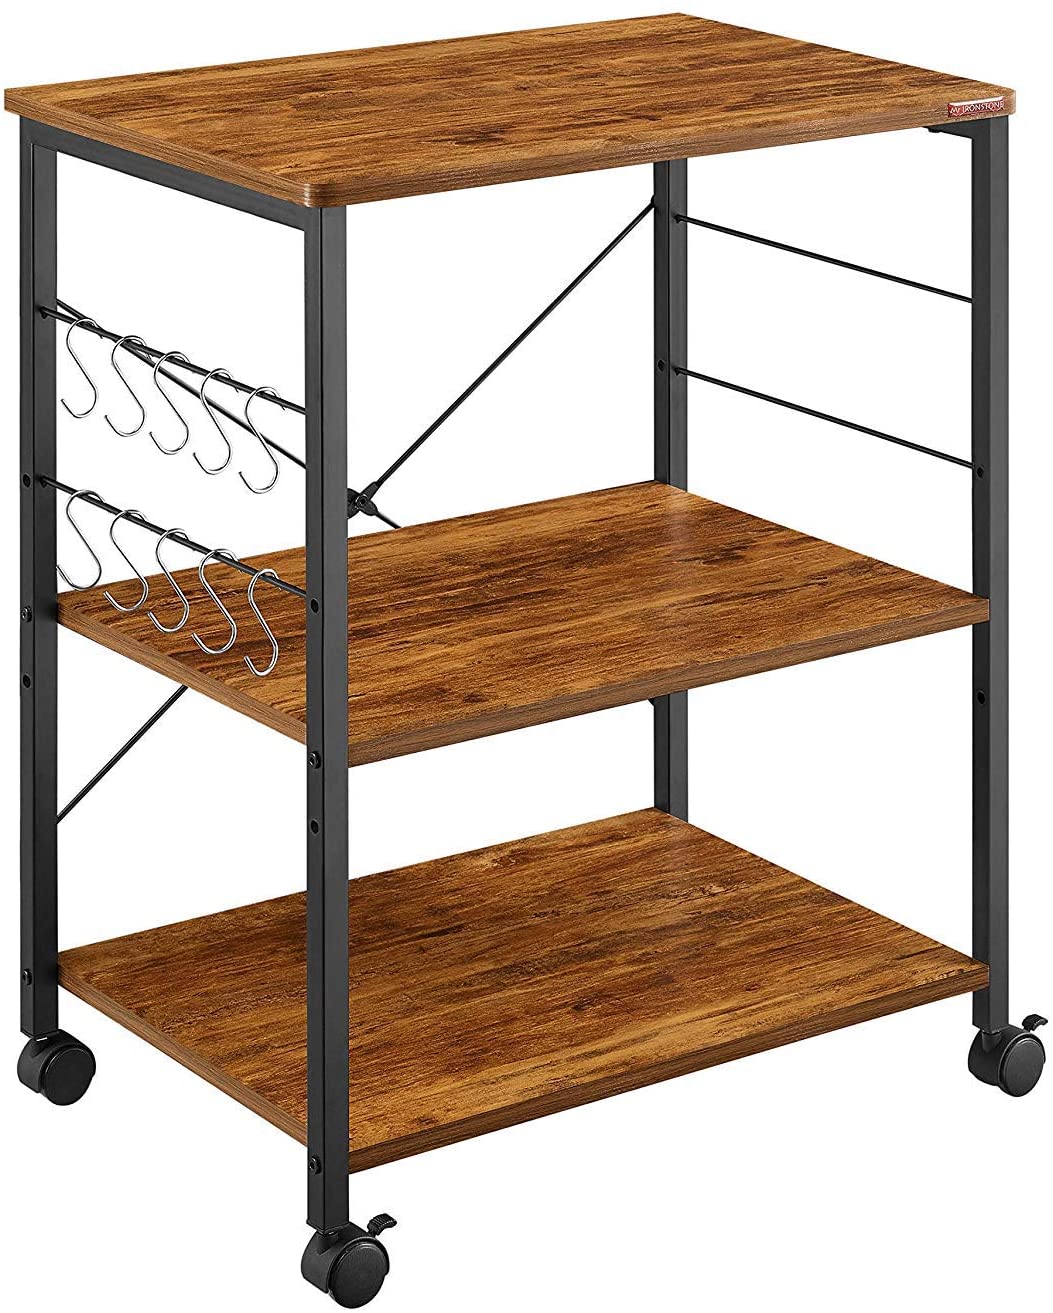 Mr IRONSTONE Kitchen Microwave Cart 3-Tier Kitchen Utility Cart Vintage Rolling Bakers Rack with 10 Hooks for Living Room Decoration